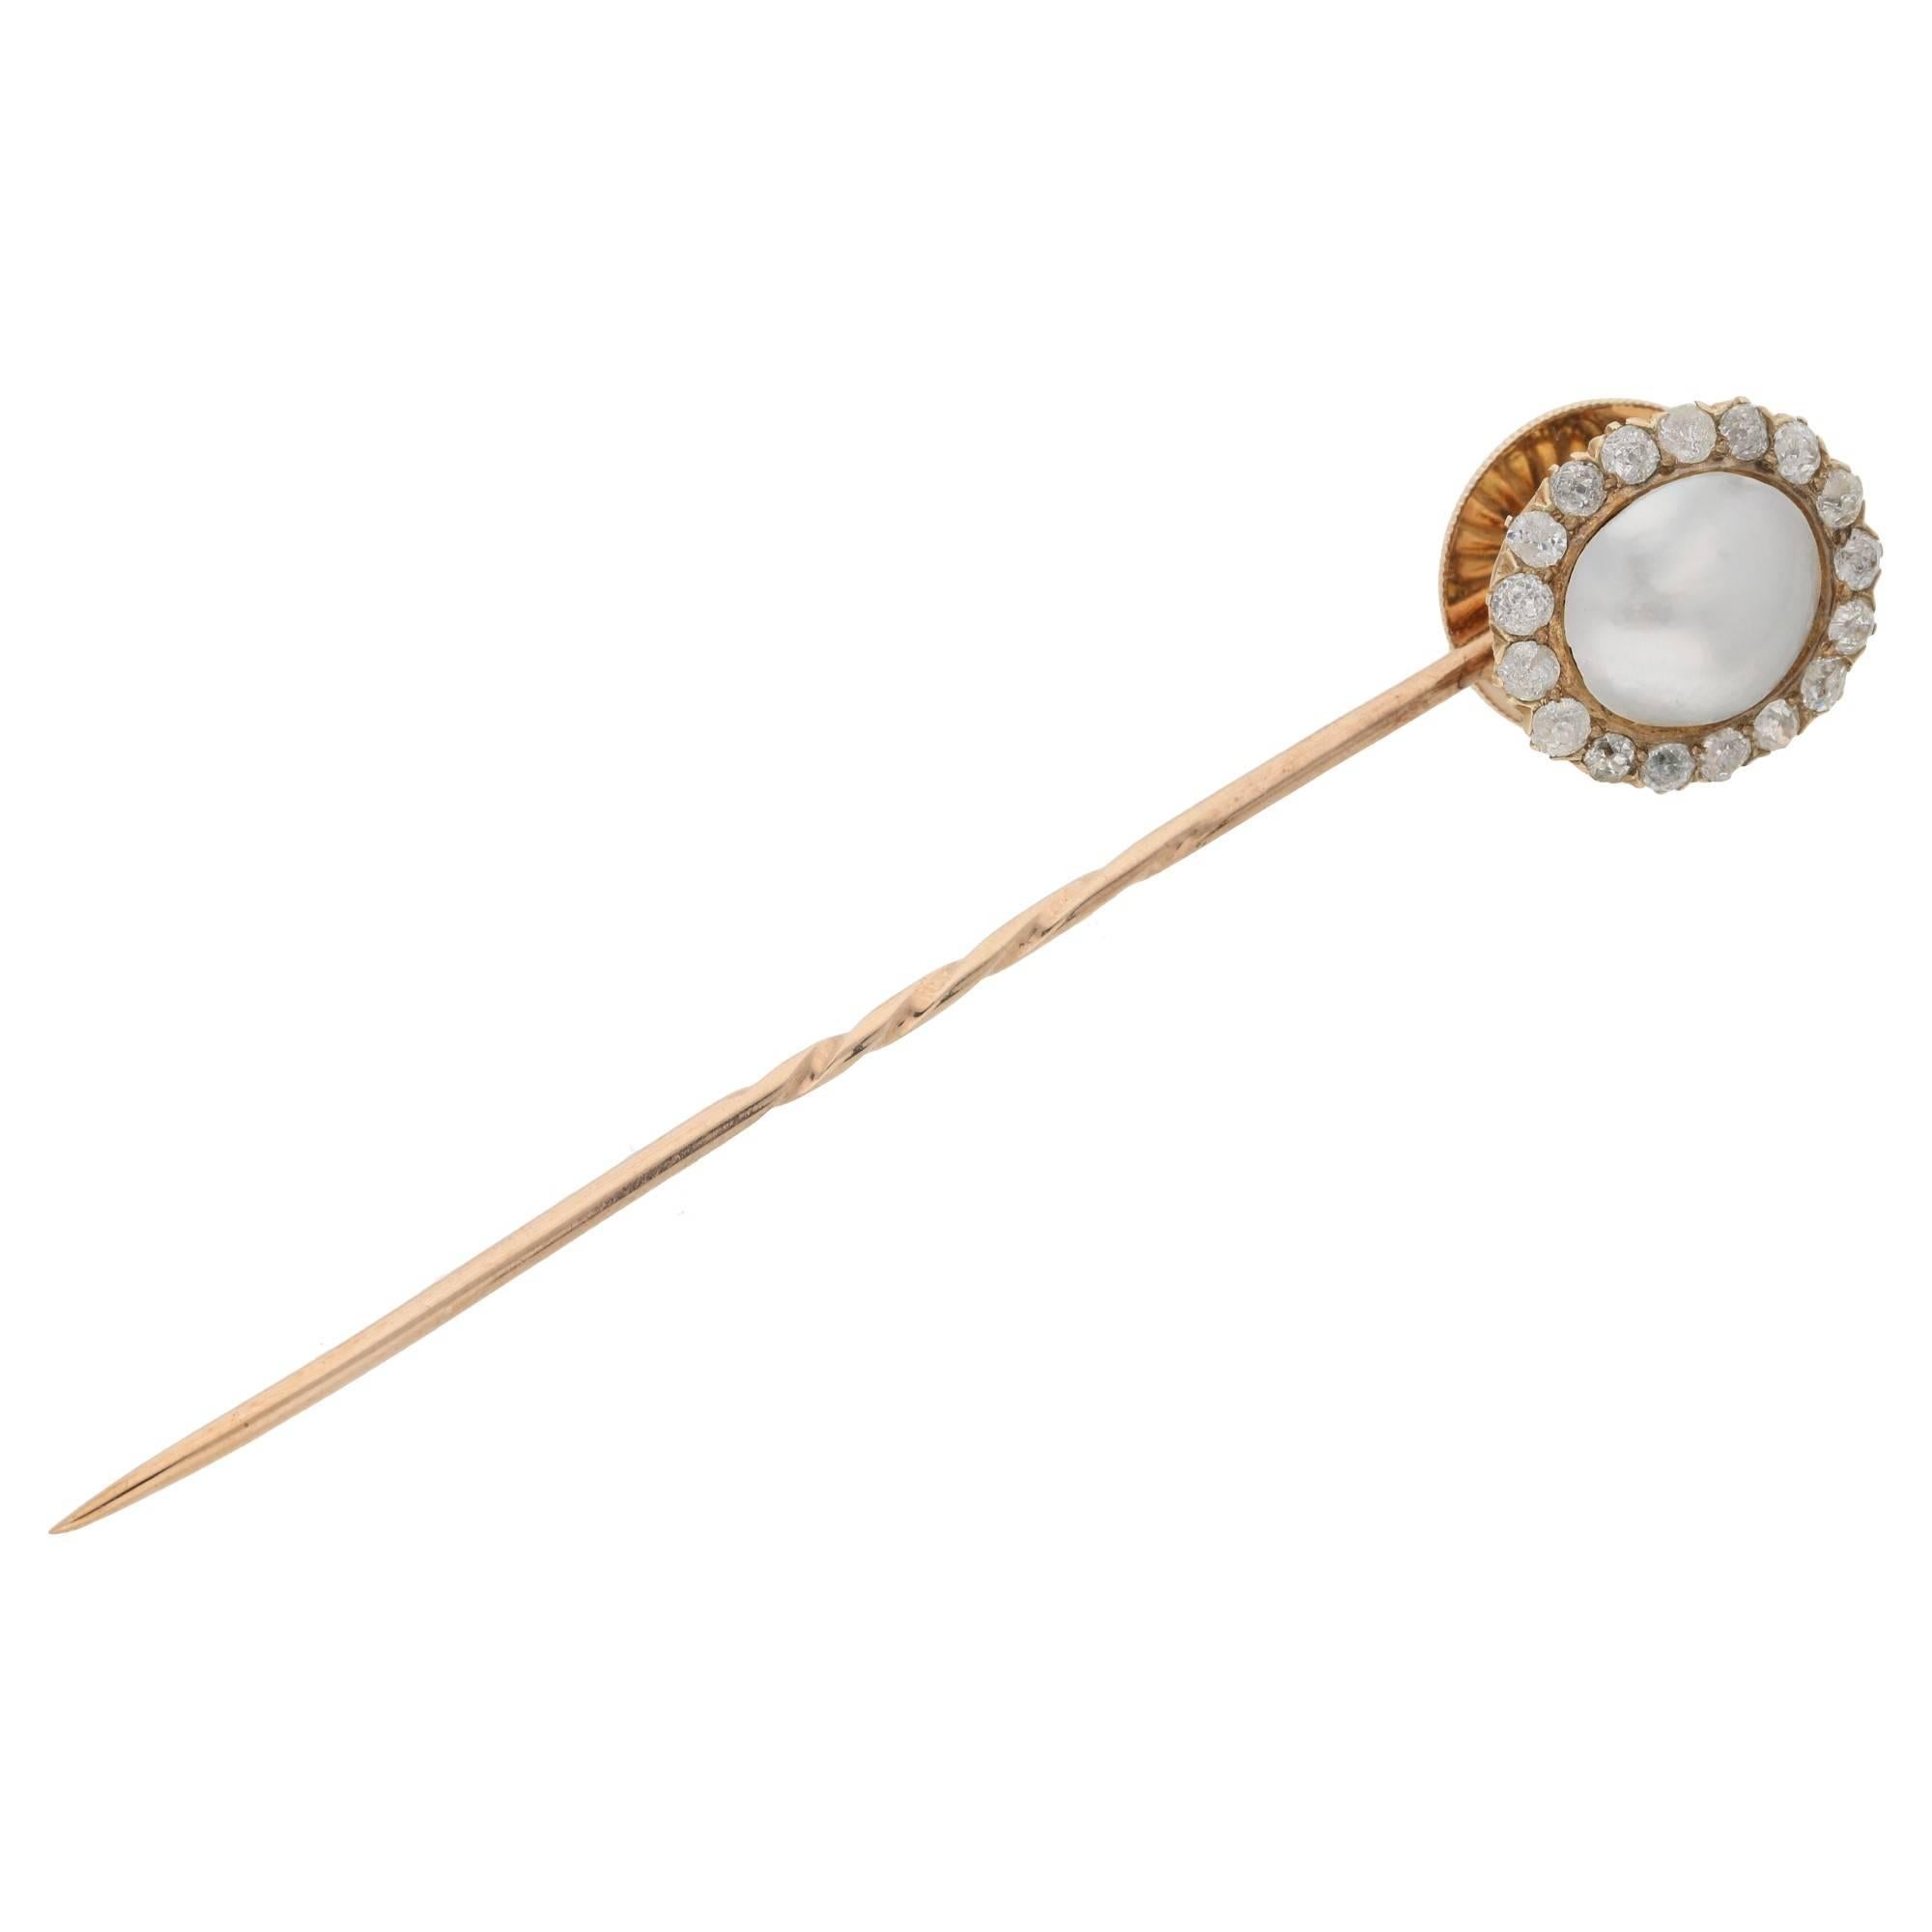 A fine Victorian pearl and diamond stick pin with detachable head. The head of the pin is formed of an oval blister pearl set to the centre with seventeen old cut diamond forming outer detail. The pin can be unscrewed from its metal 'stick' to be